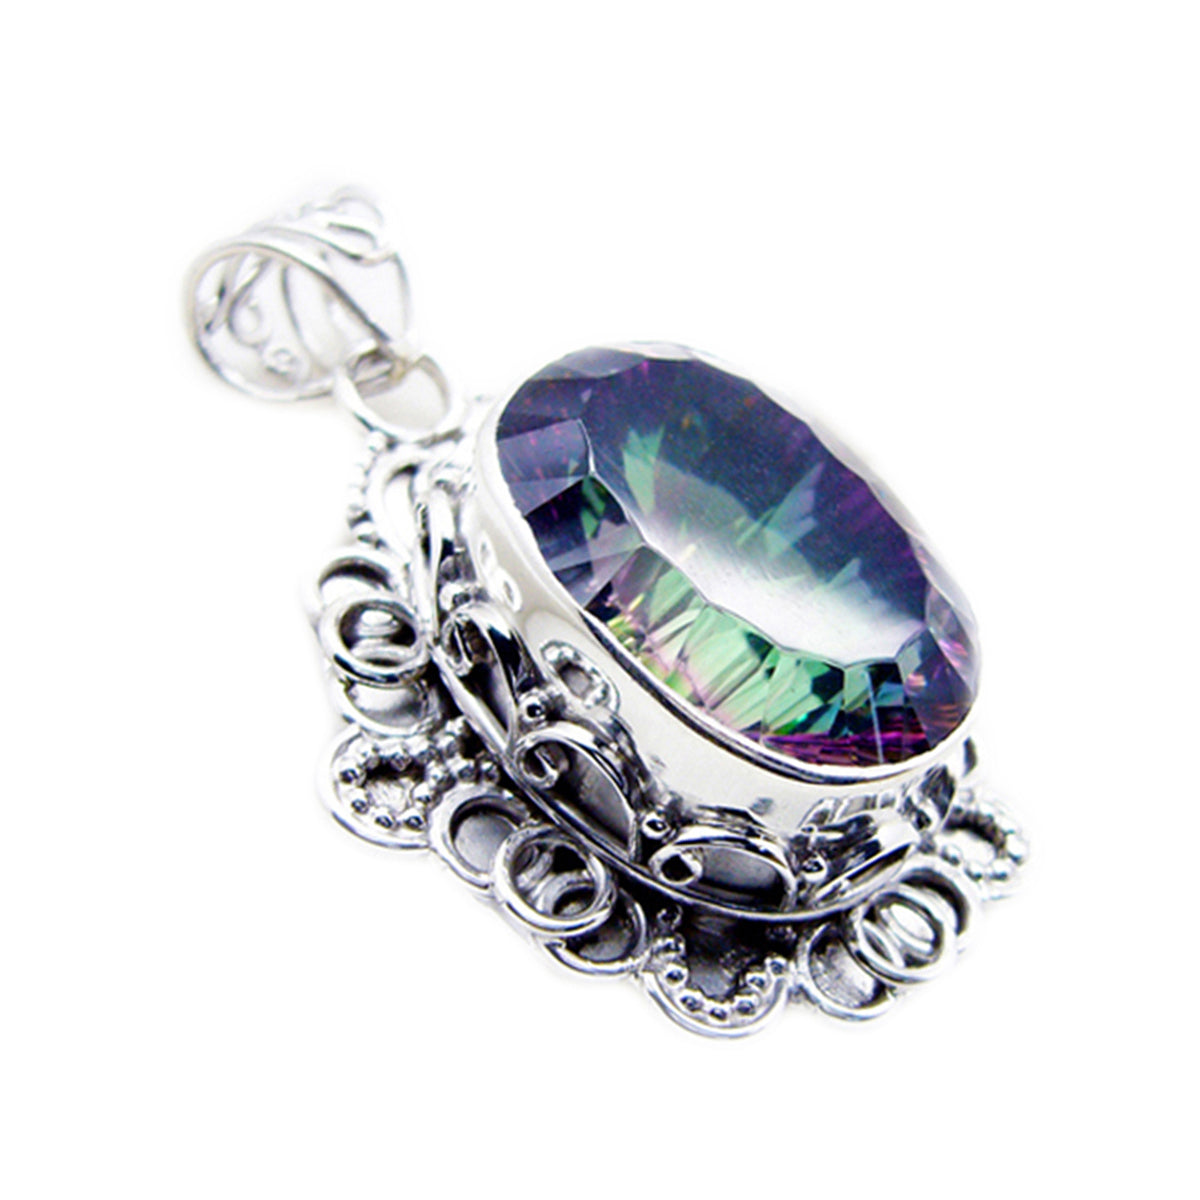 Riyo Lovely Gems Oval Faceted Multi Color Mystic Quartz Silver Pendant Gift For Wife